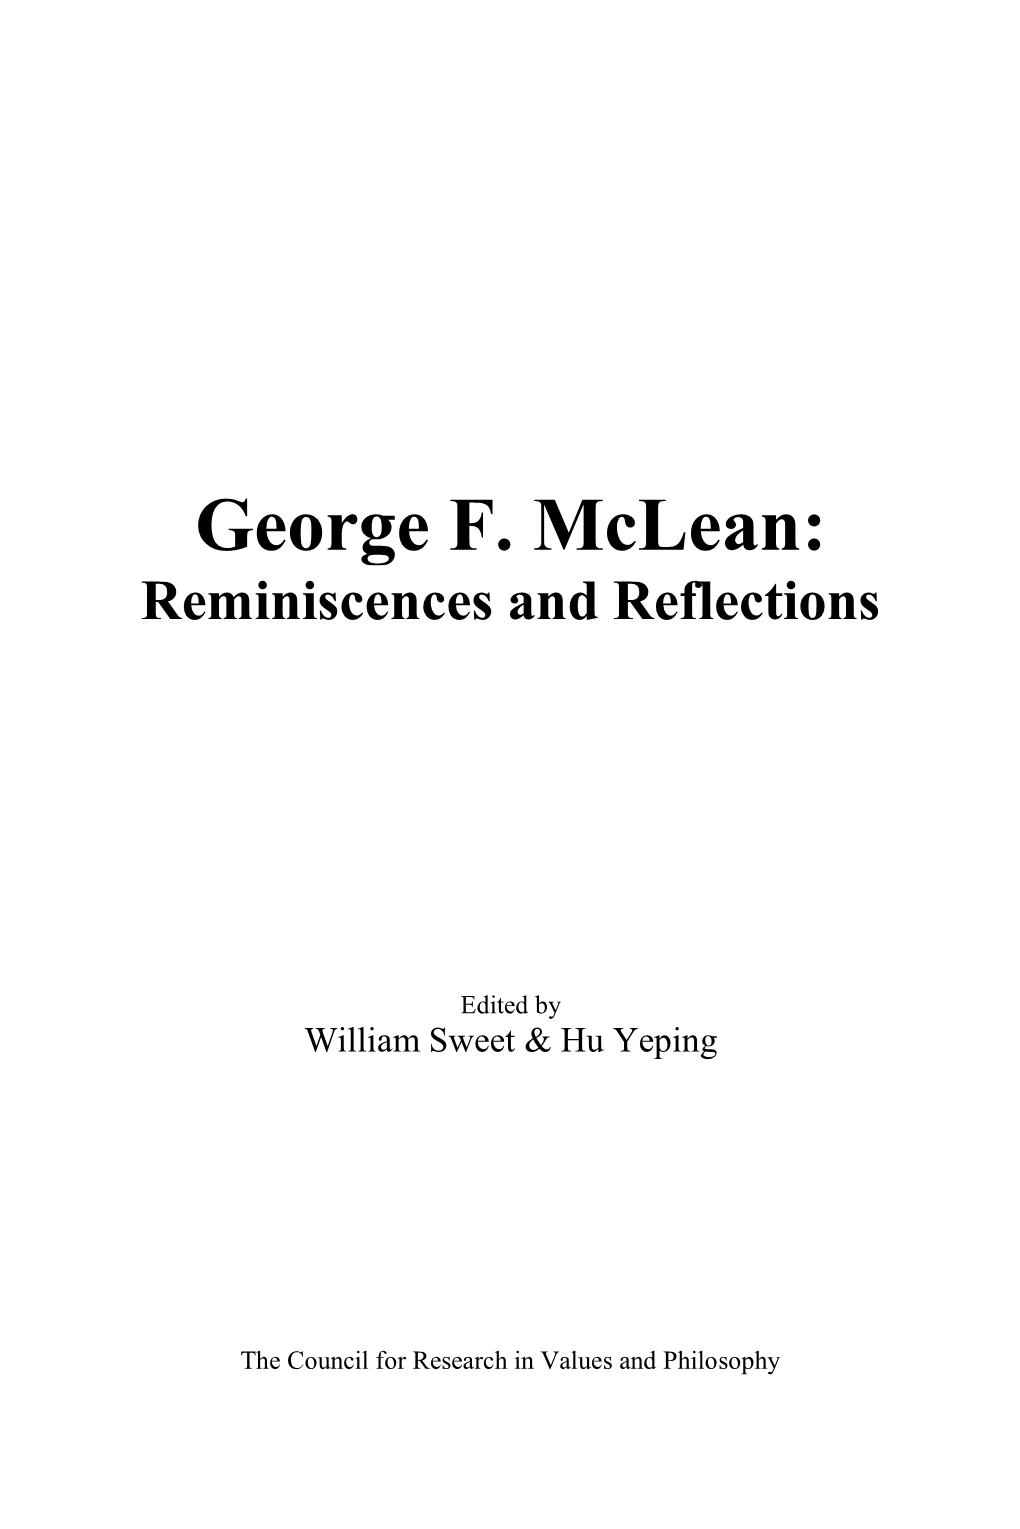 George F. Mclean: Reminiscences and Reflections